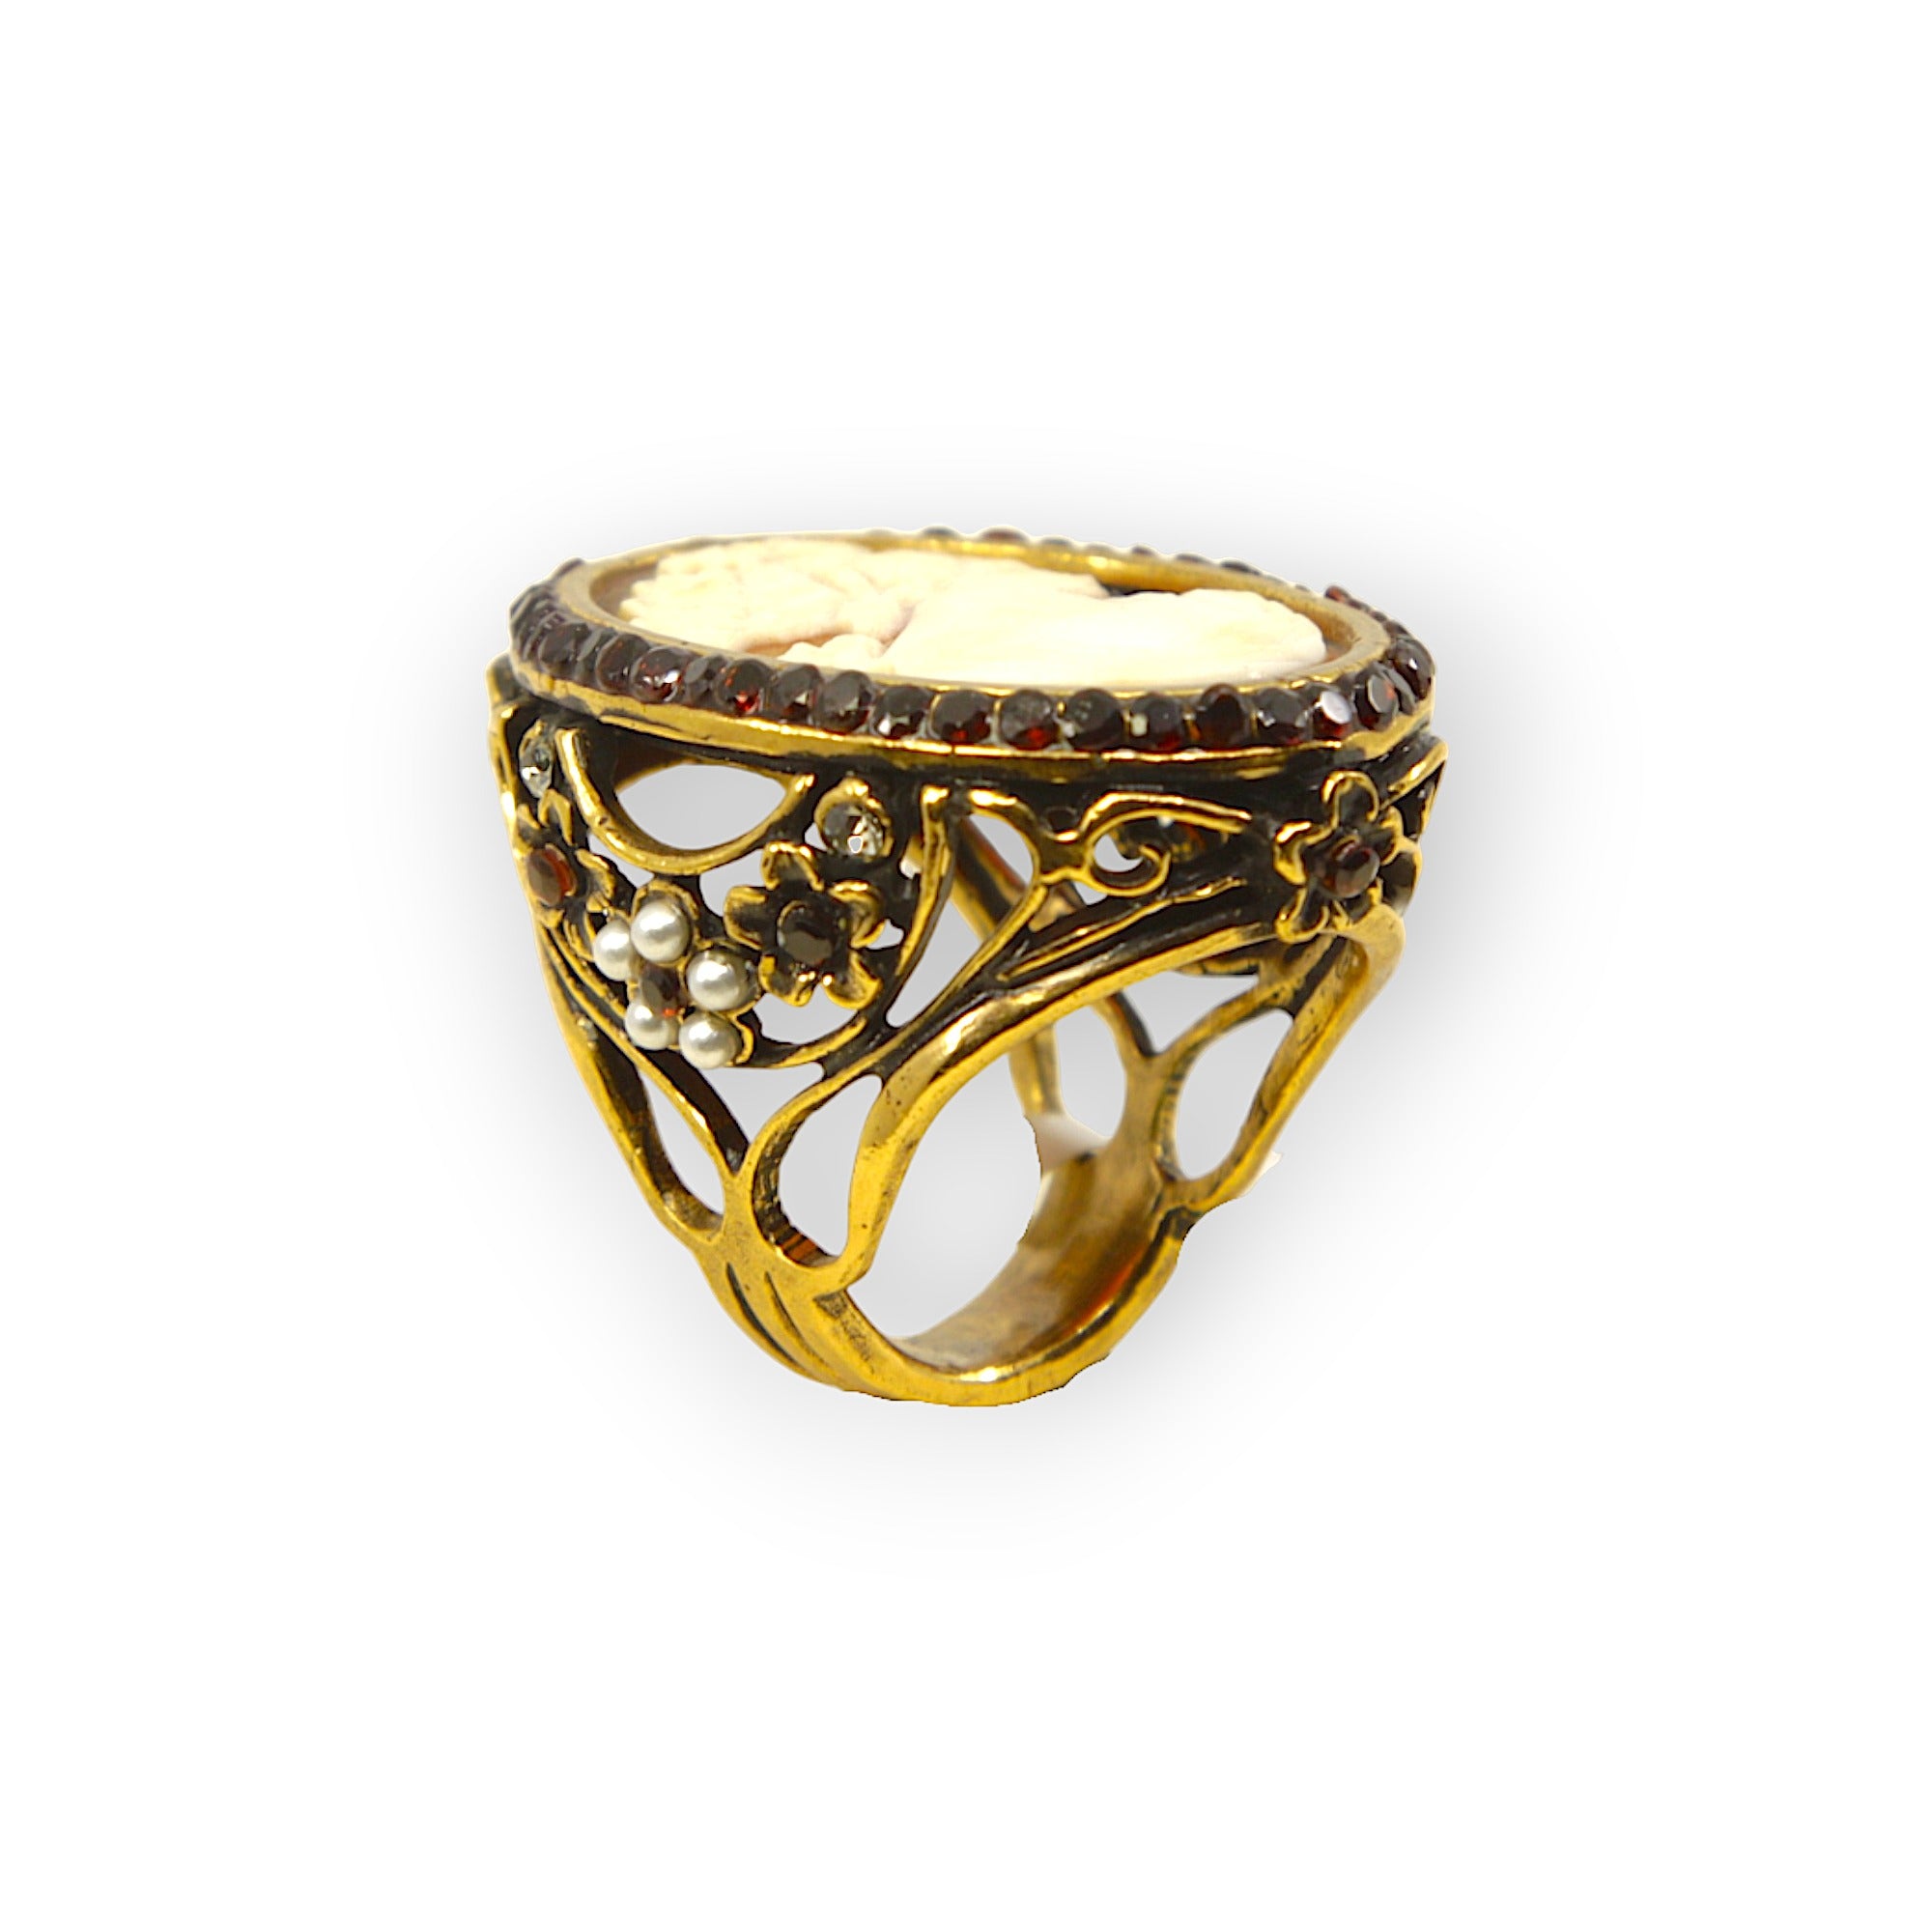 CAMMEO RING